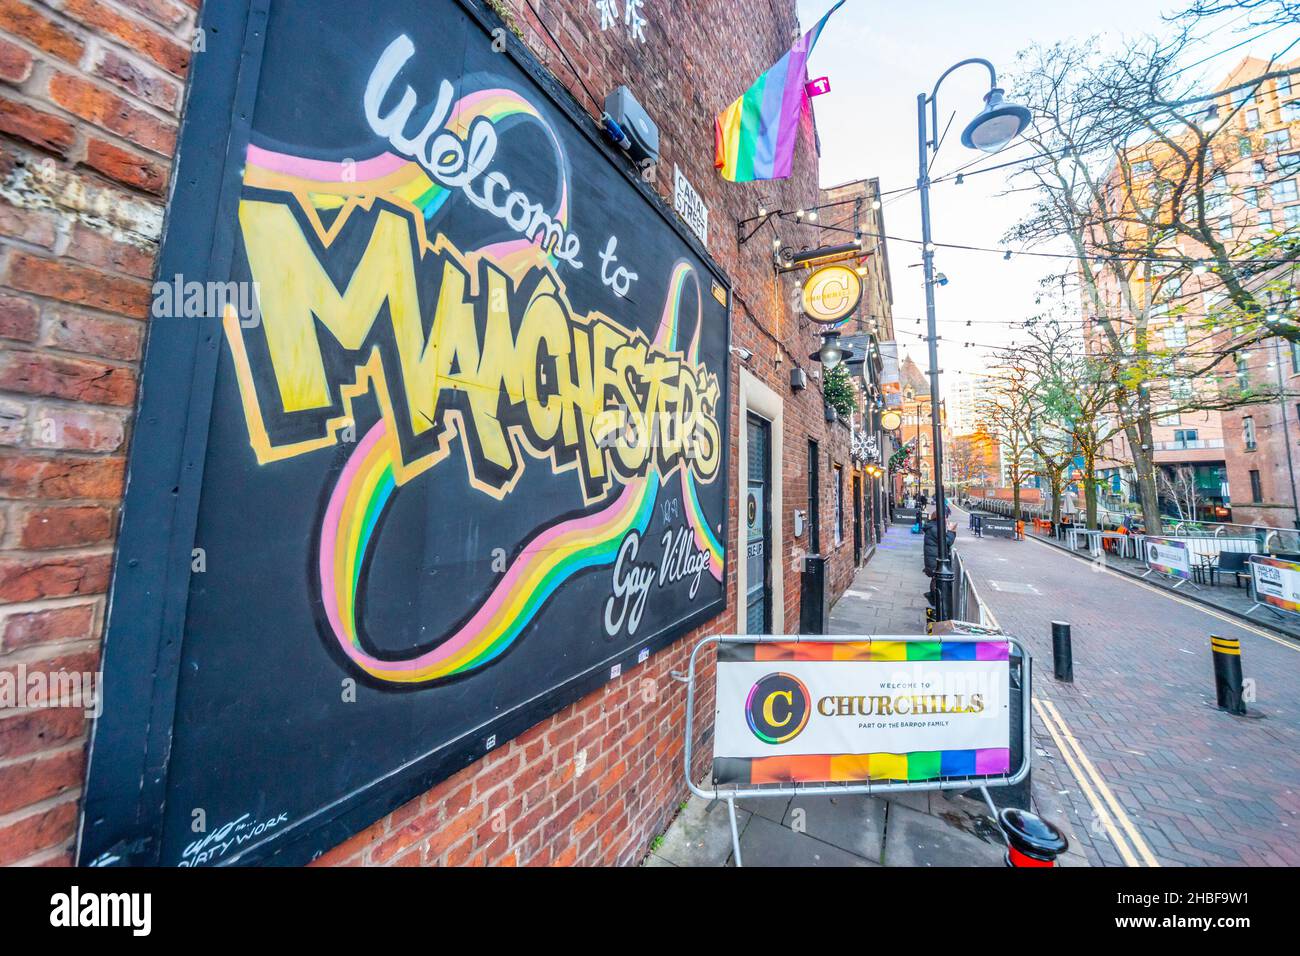 Sign on a building in Canal Street, Manchester, welcoming people to the 'gay village', located near to the junction of Chorlton Street Stock Photo